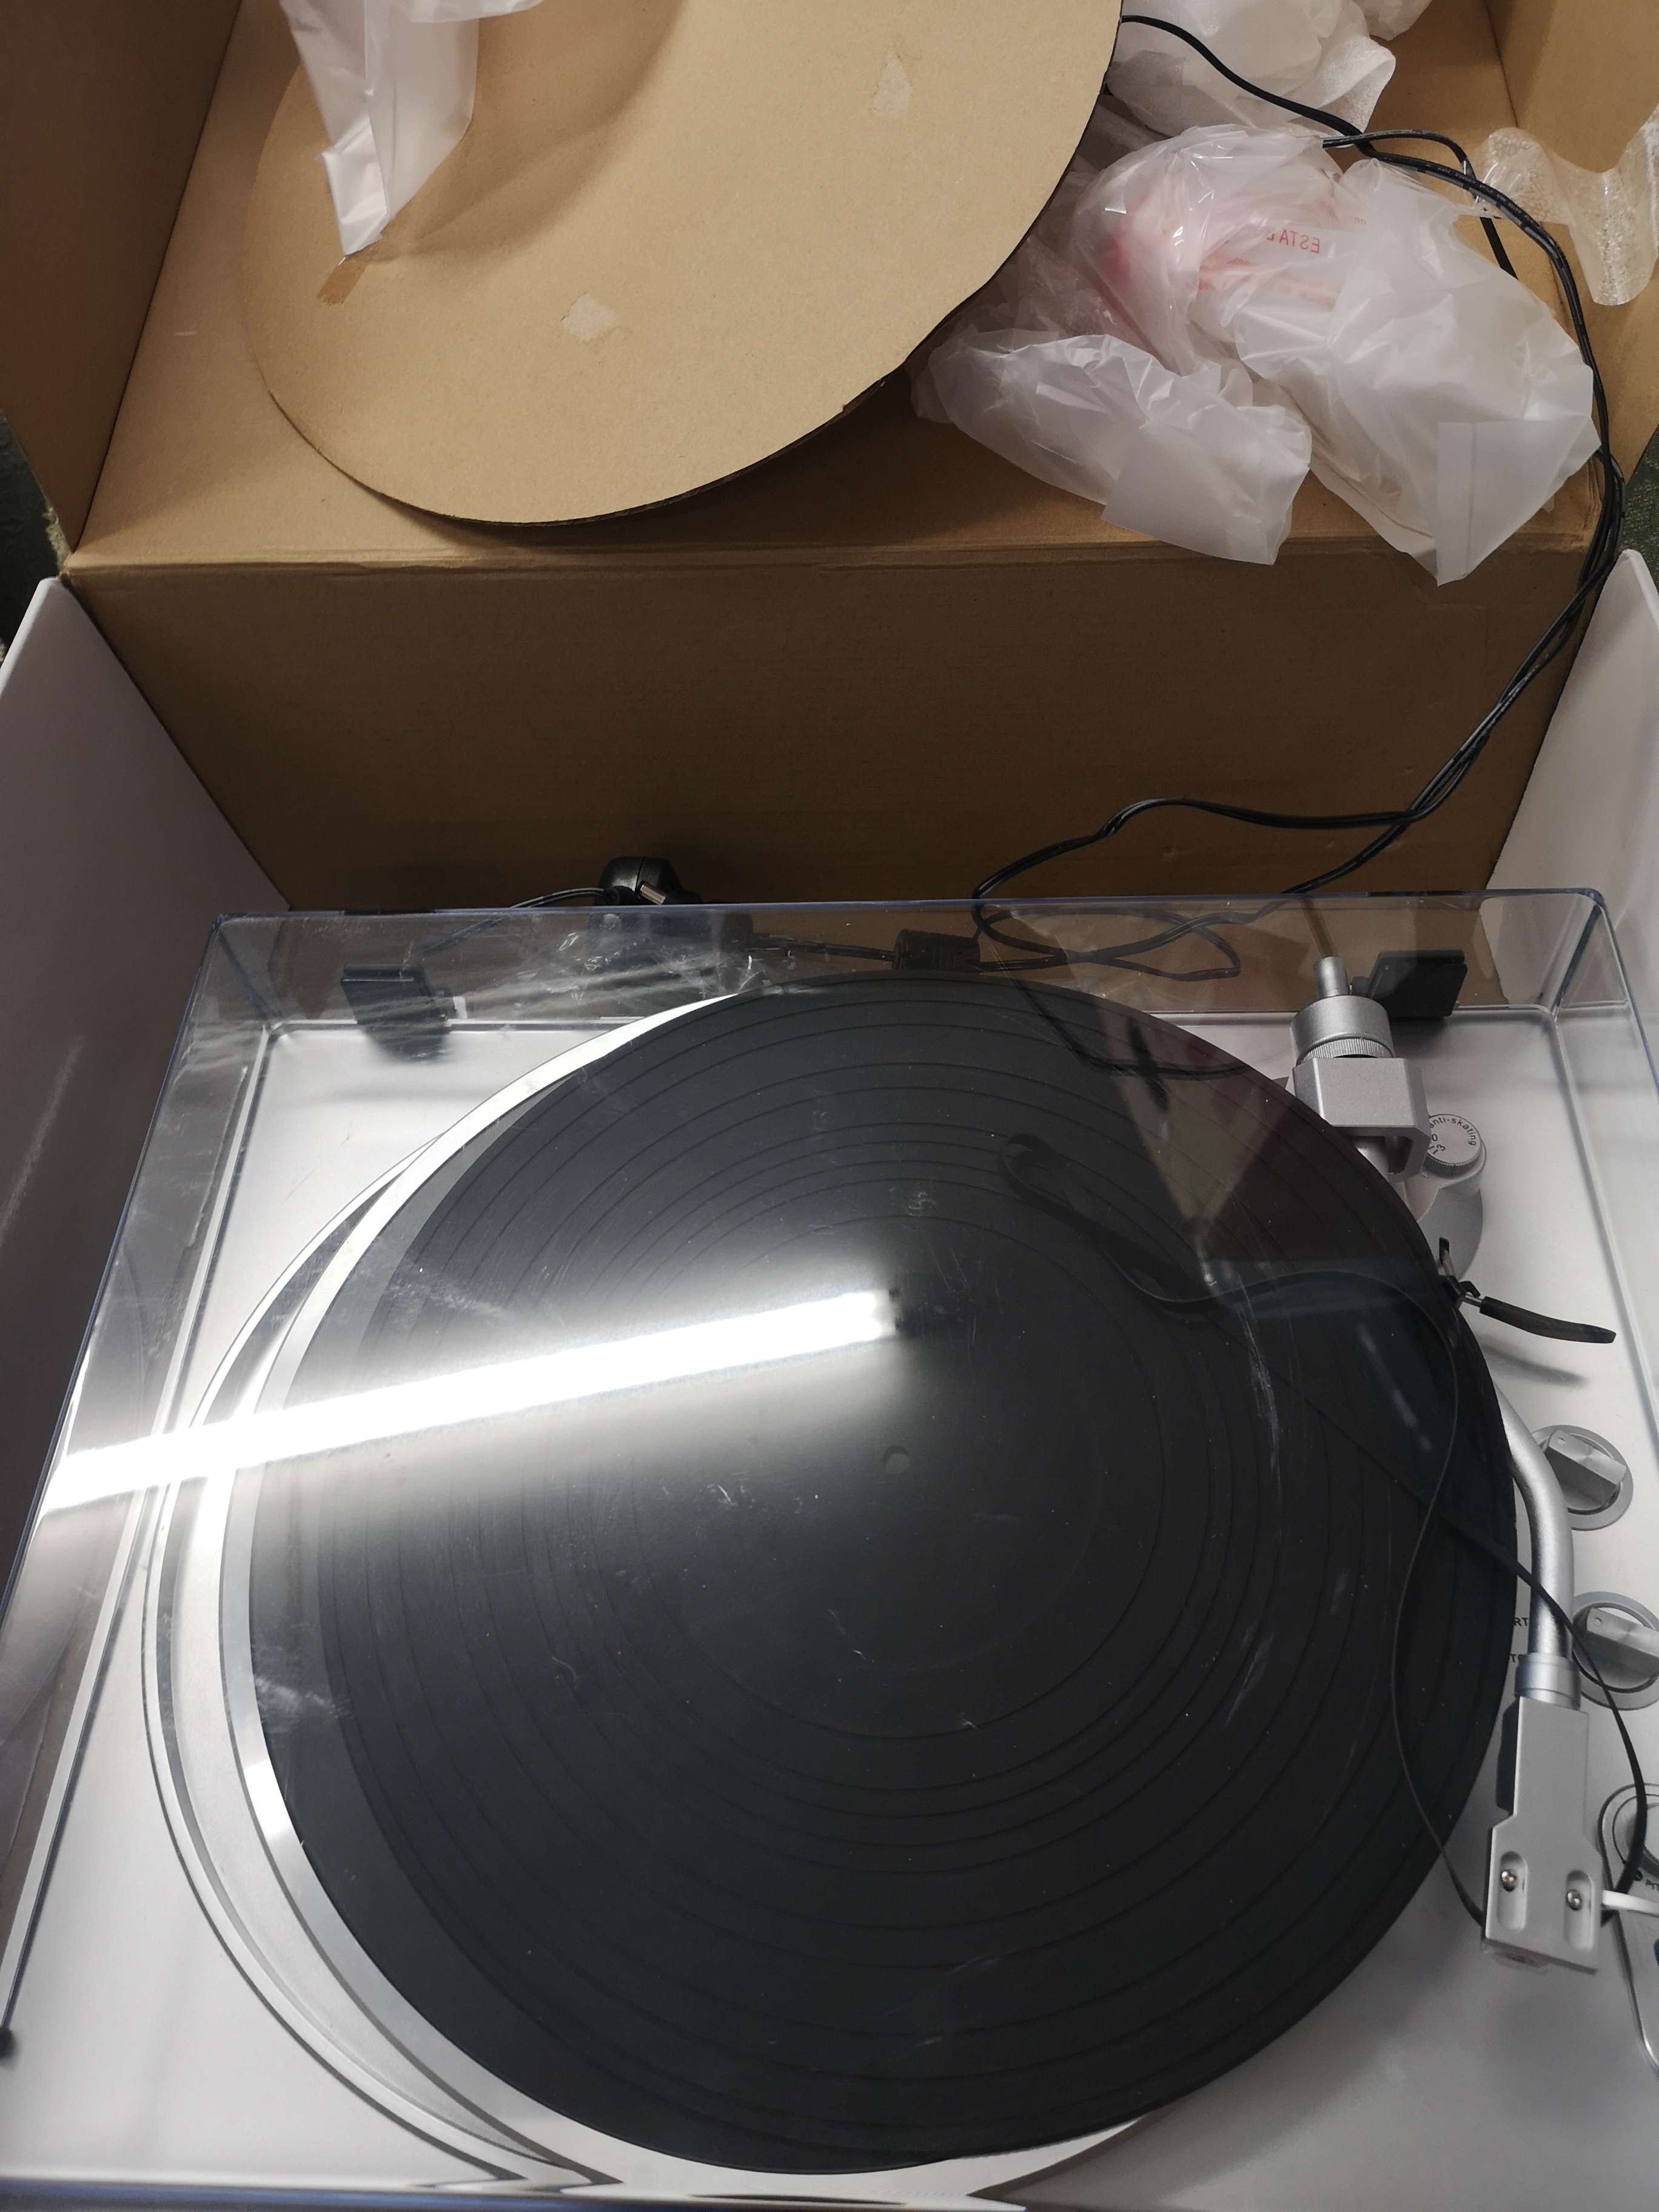 Boxed turntable.